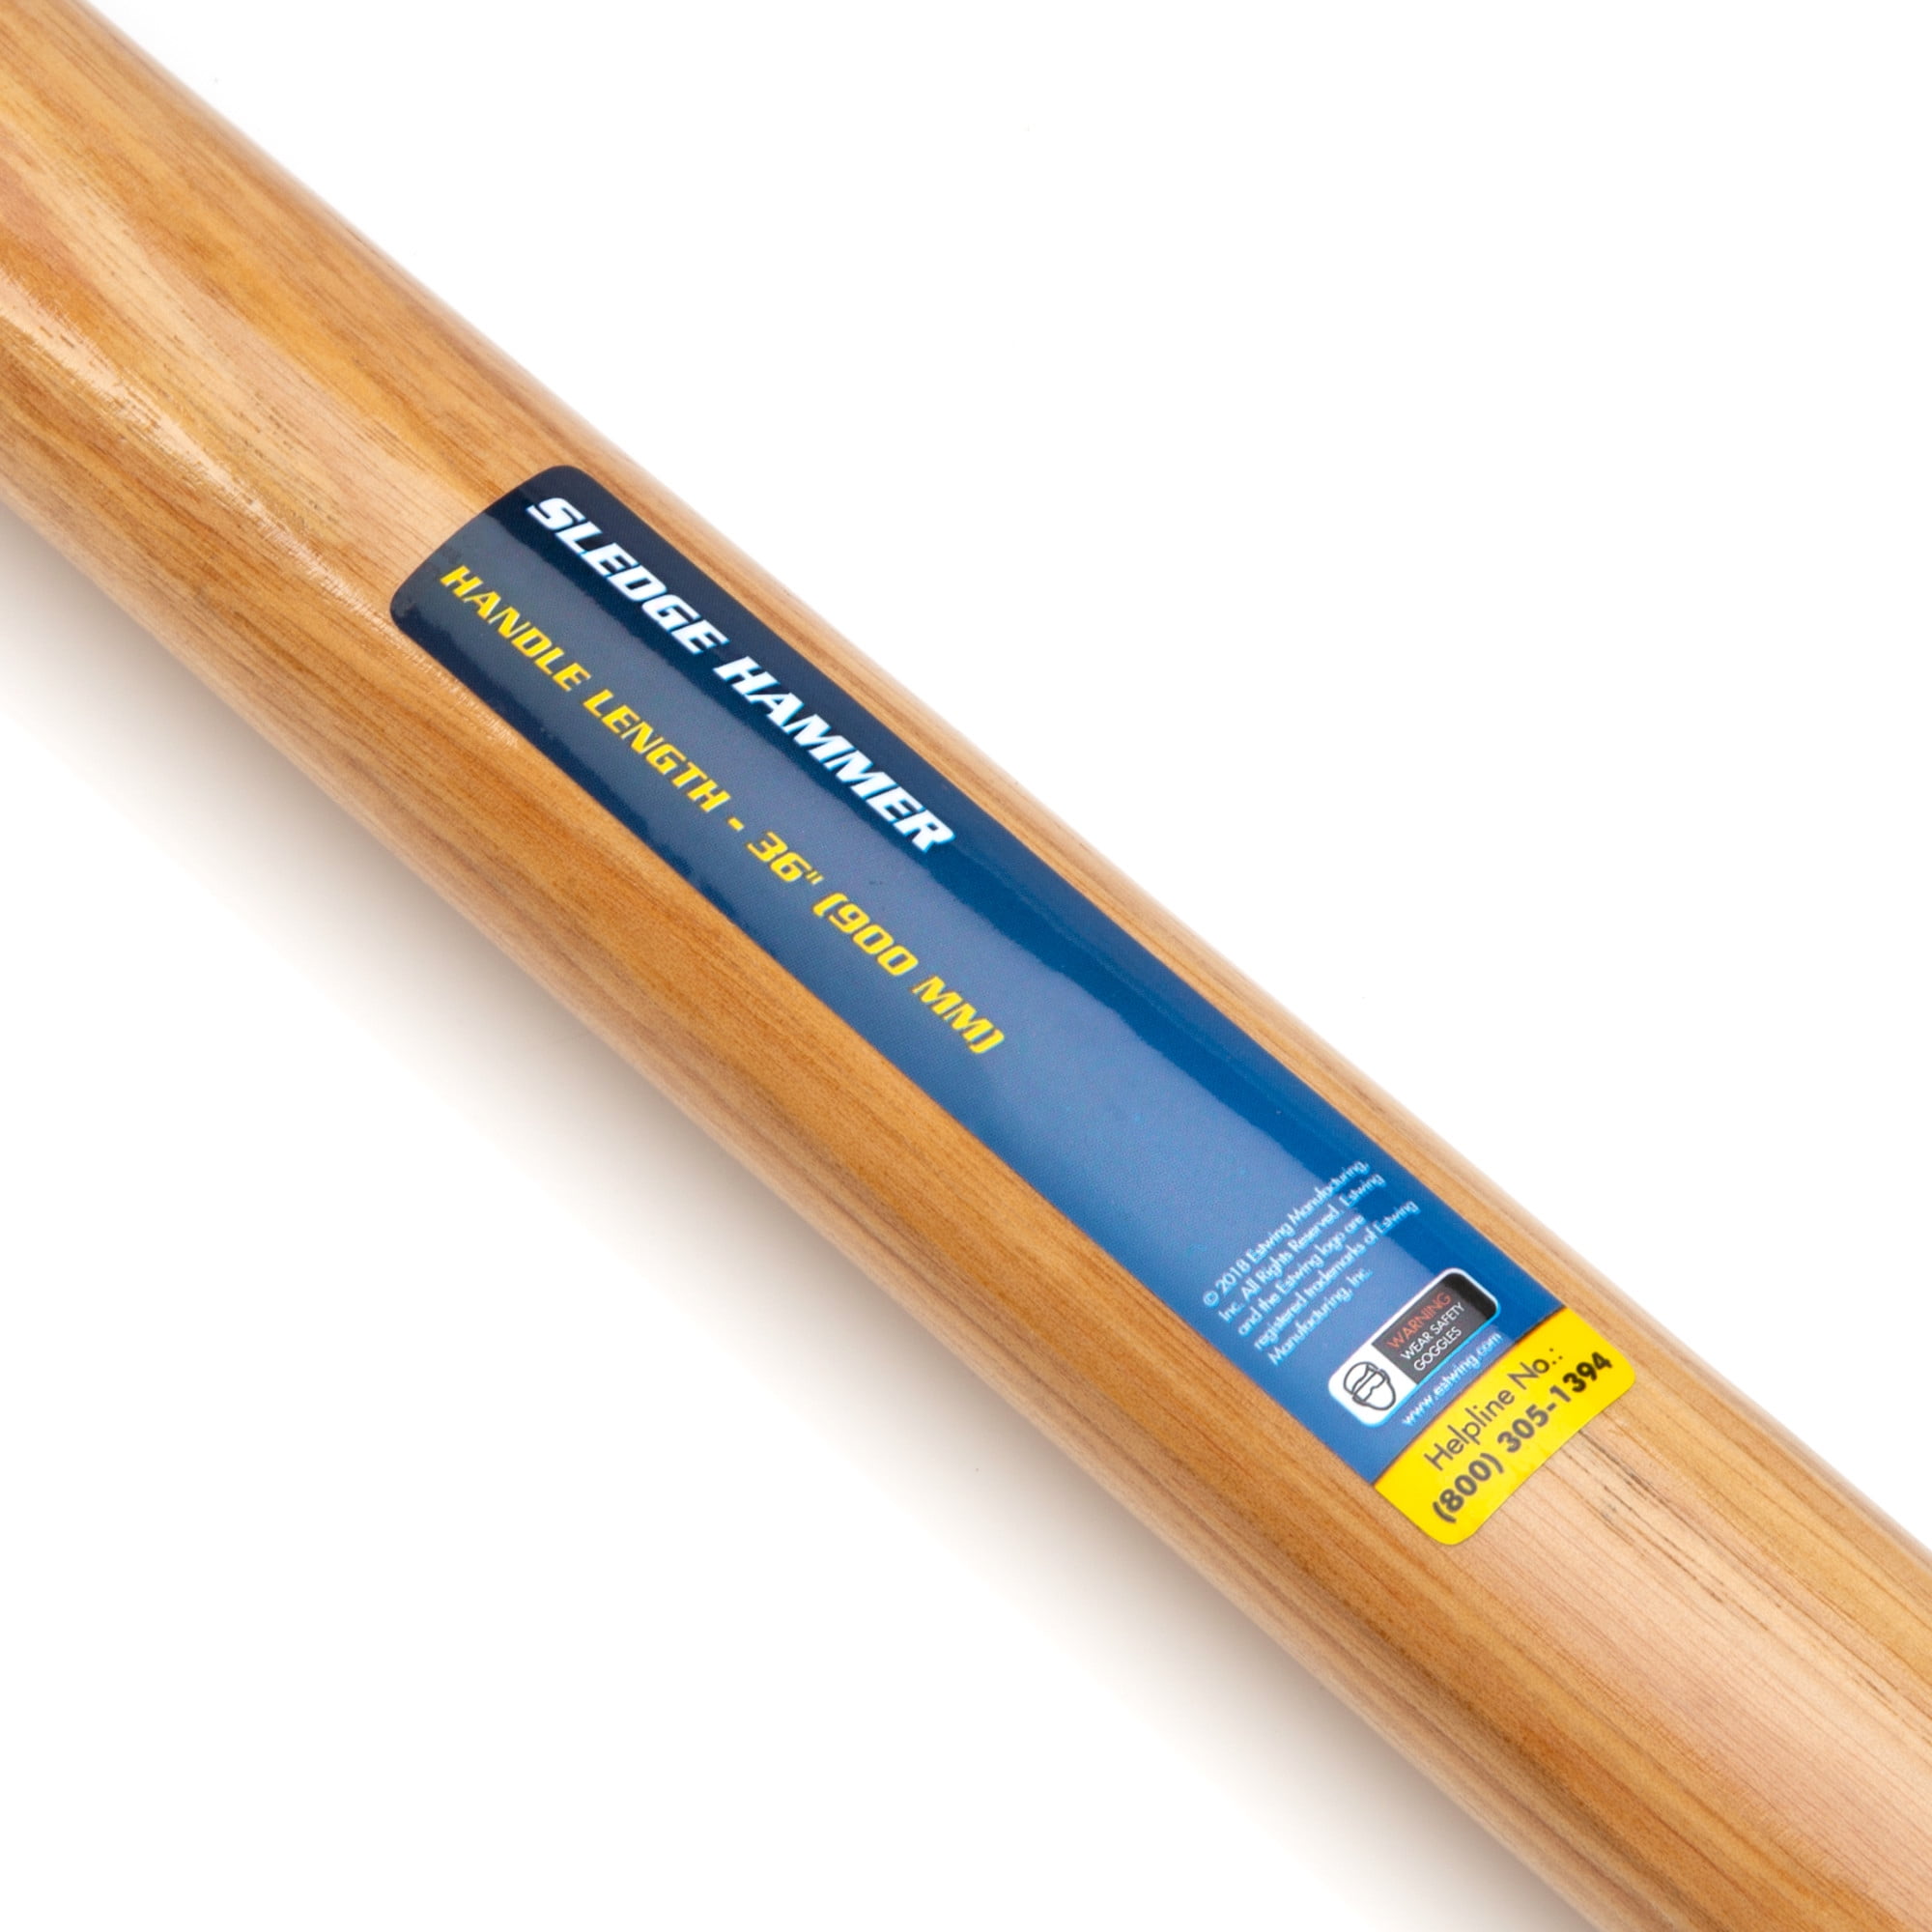 TH12005 Solid Hickory Mallet, 3 diameter, 1.6 lbs.